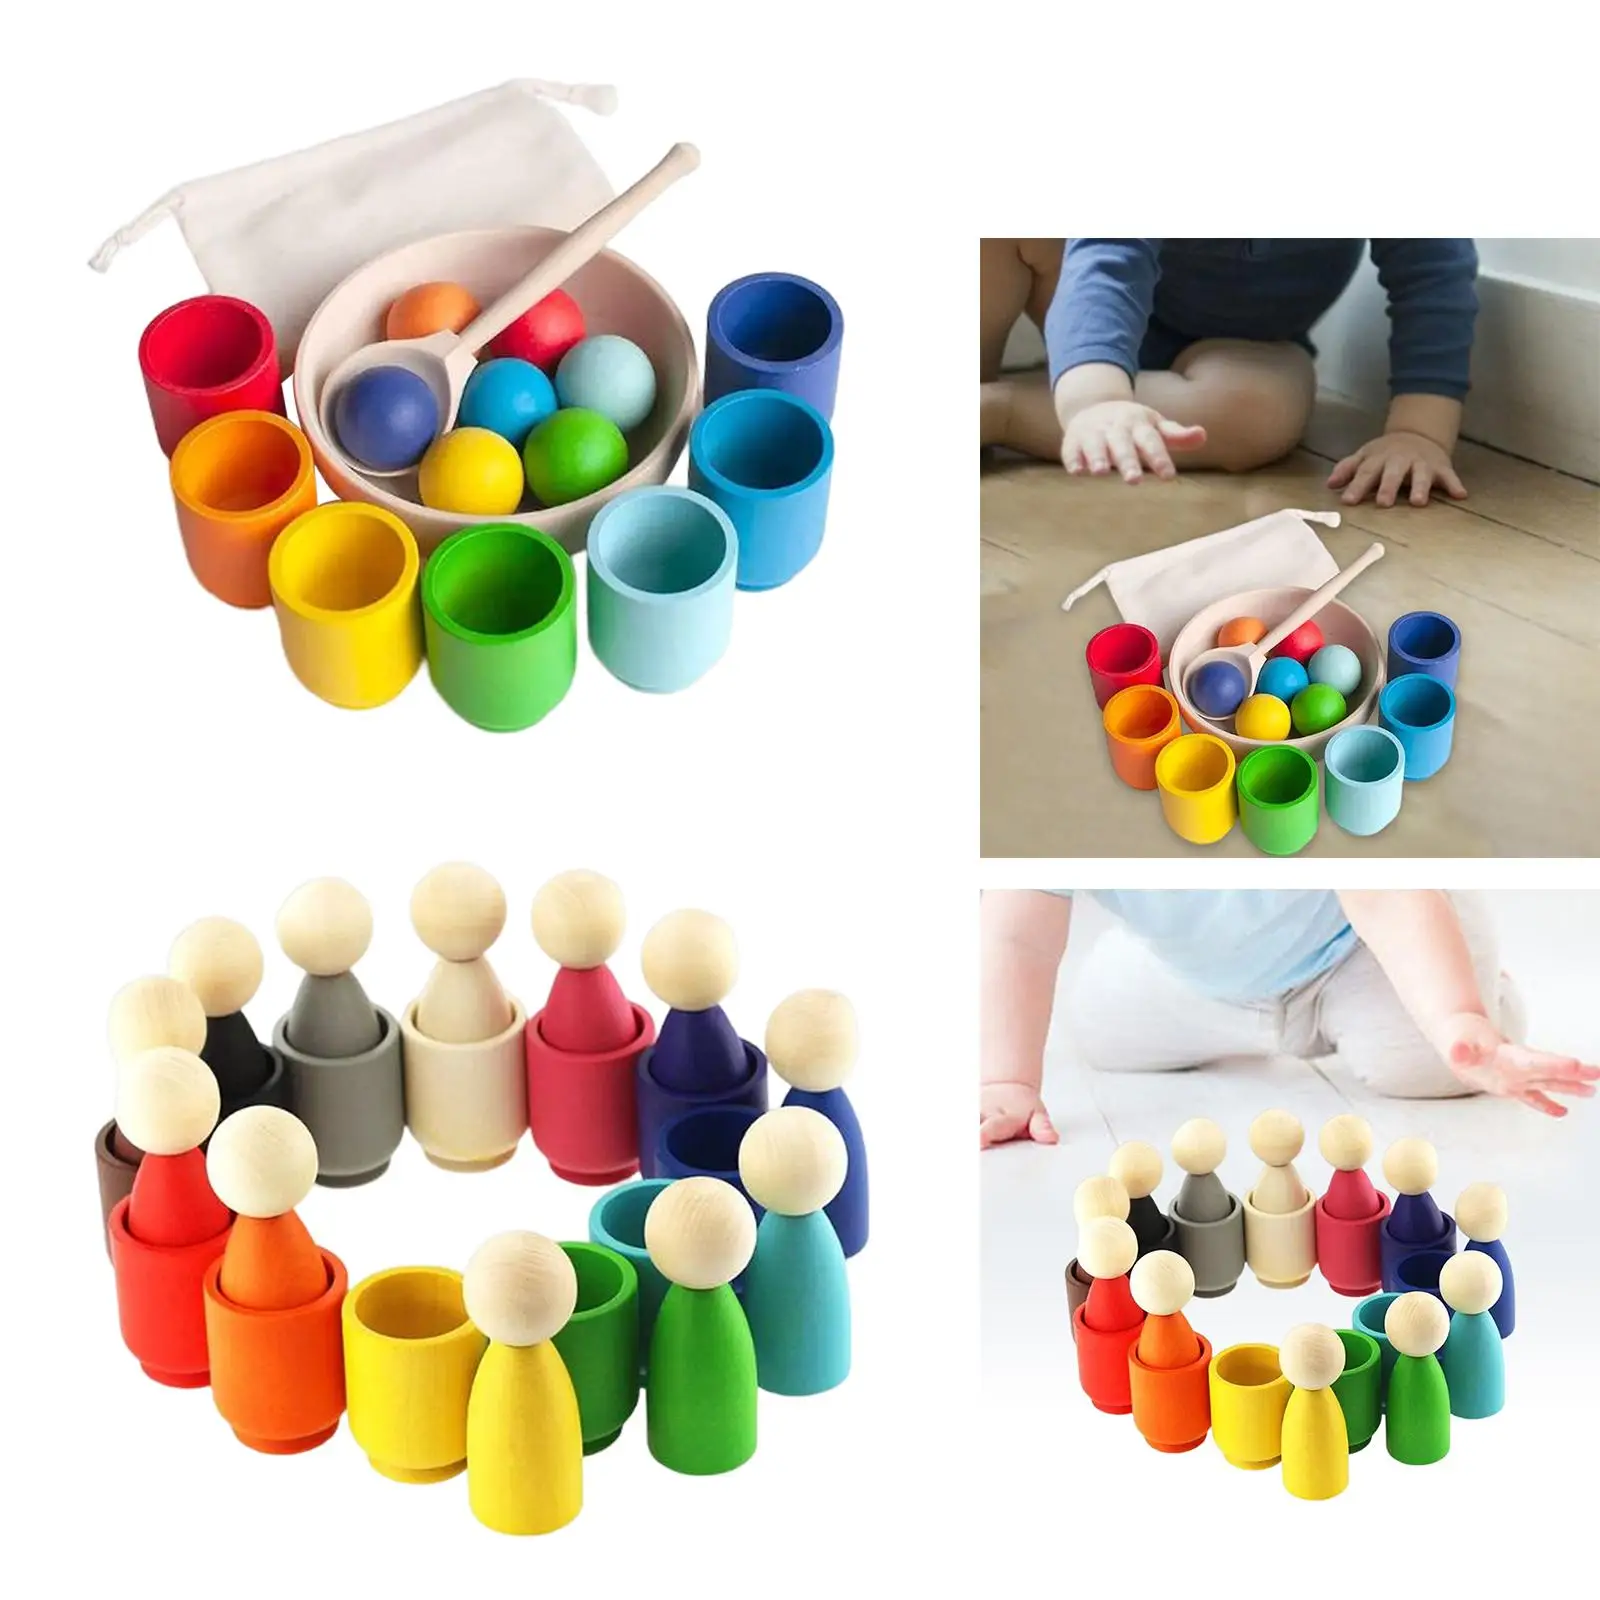 Toddlers Balls in Cups Montessori Color Sorting and Counting Board Game Preschool Learning Toy for 1+ Year Old Kids Children